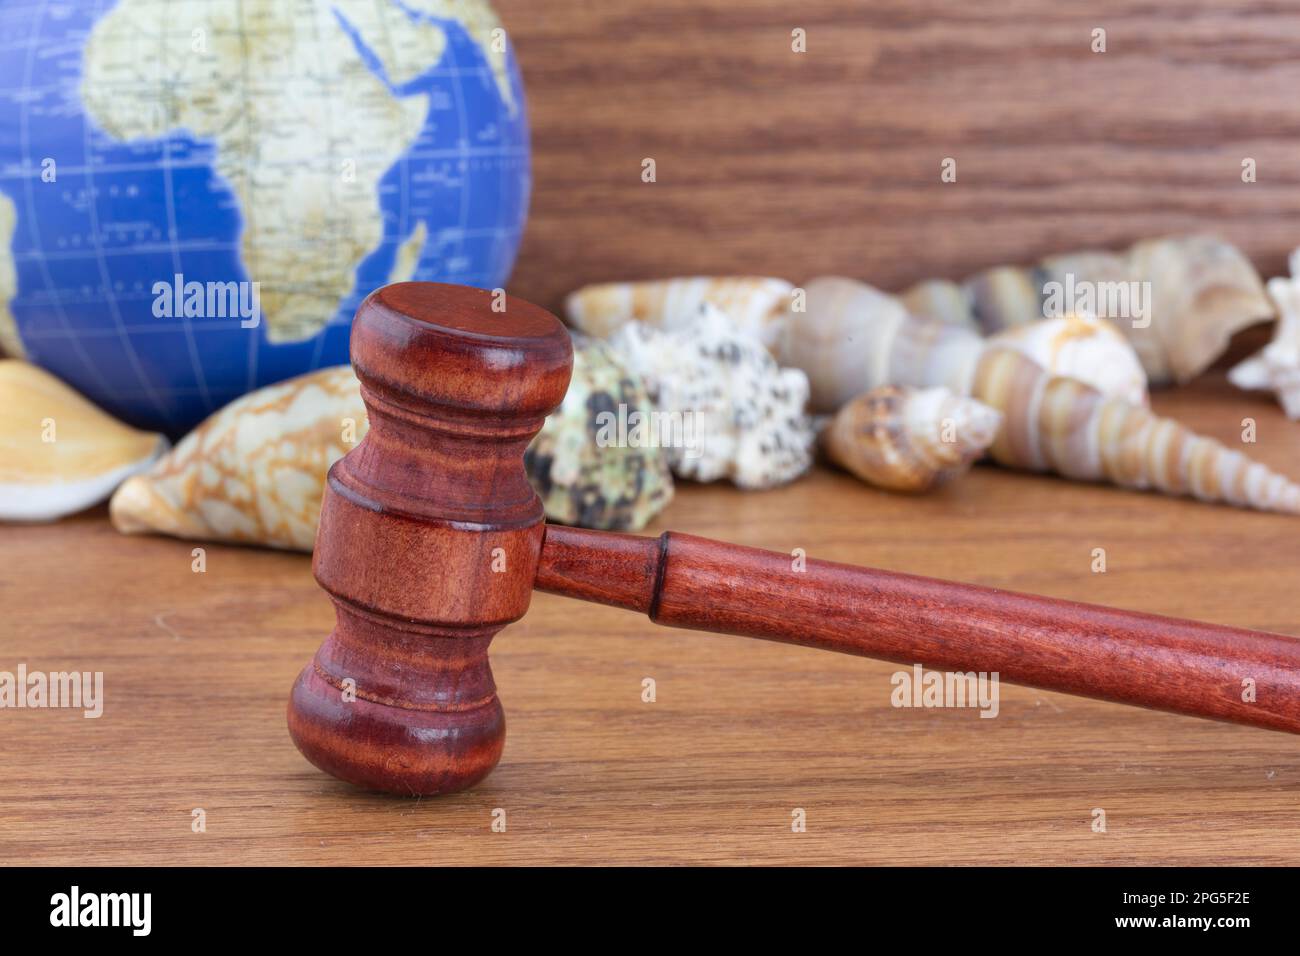 Global marine environment  seen in still life of shells, globe, and gavel reflect the worldwide nature of oceanic regulations and social issues Stock Photo